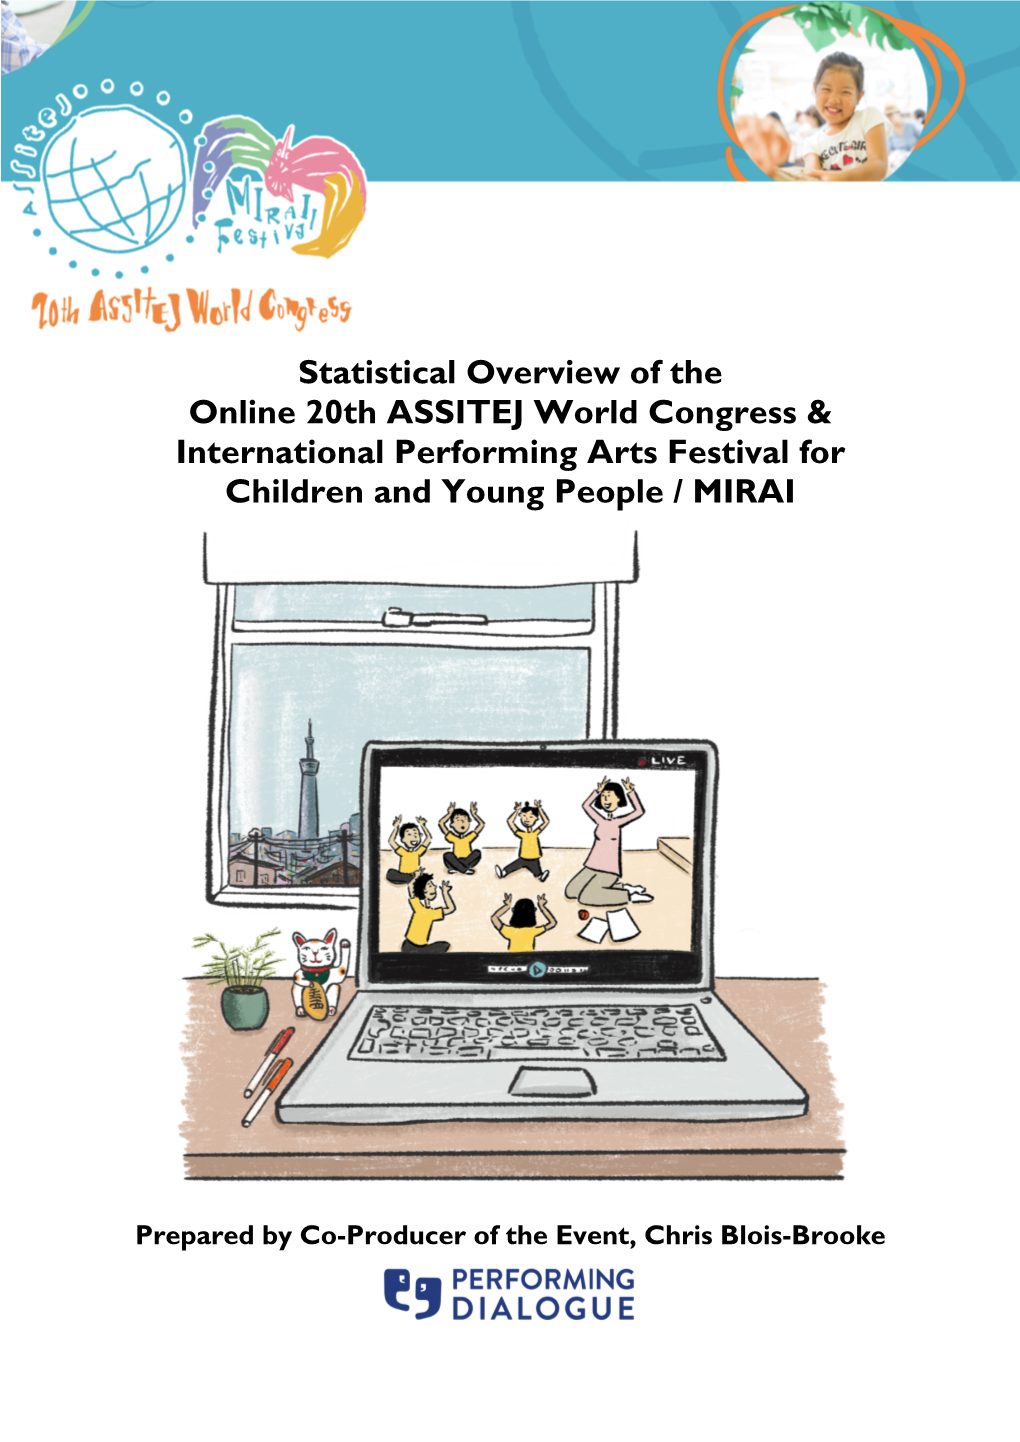 Statistical Overview of the Online 20Th ASSITEJ World Congress & International Performing Arts Festival for Children and Young People / MIRAI